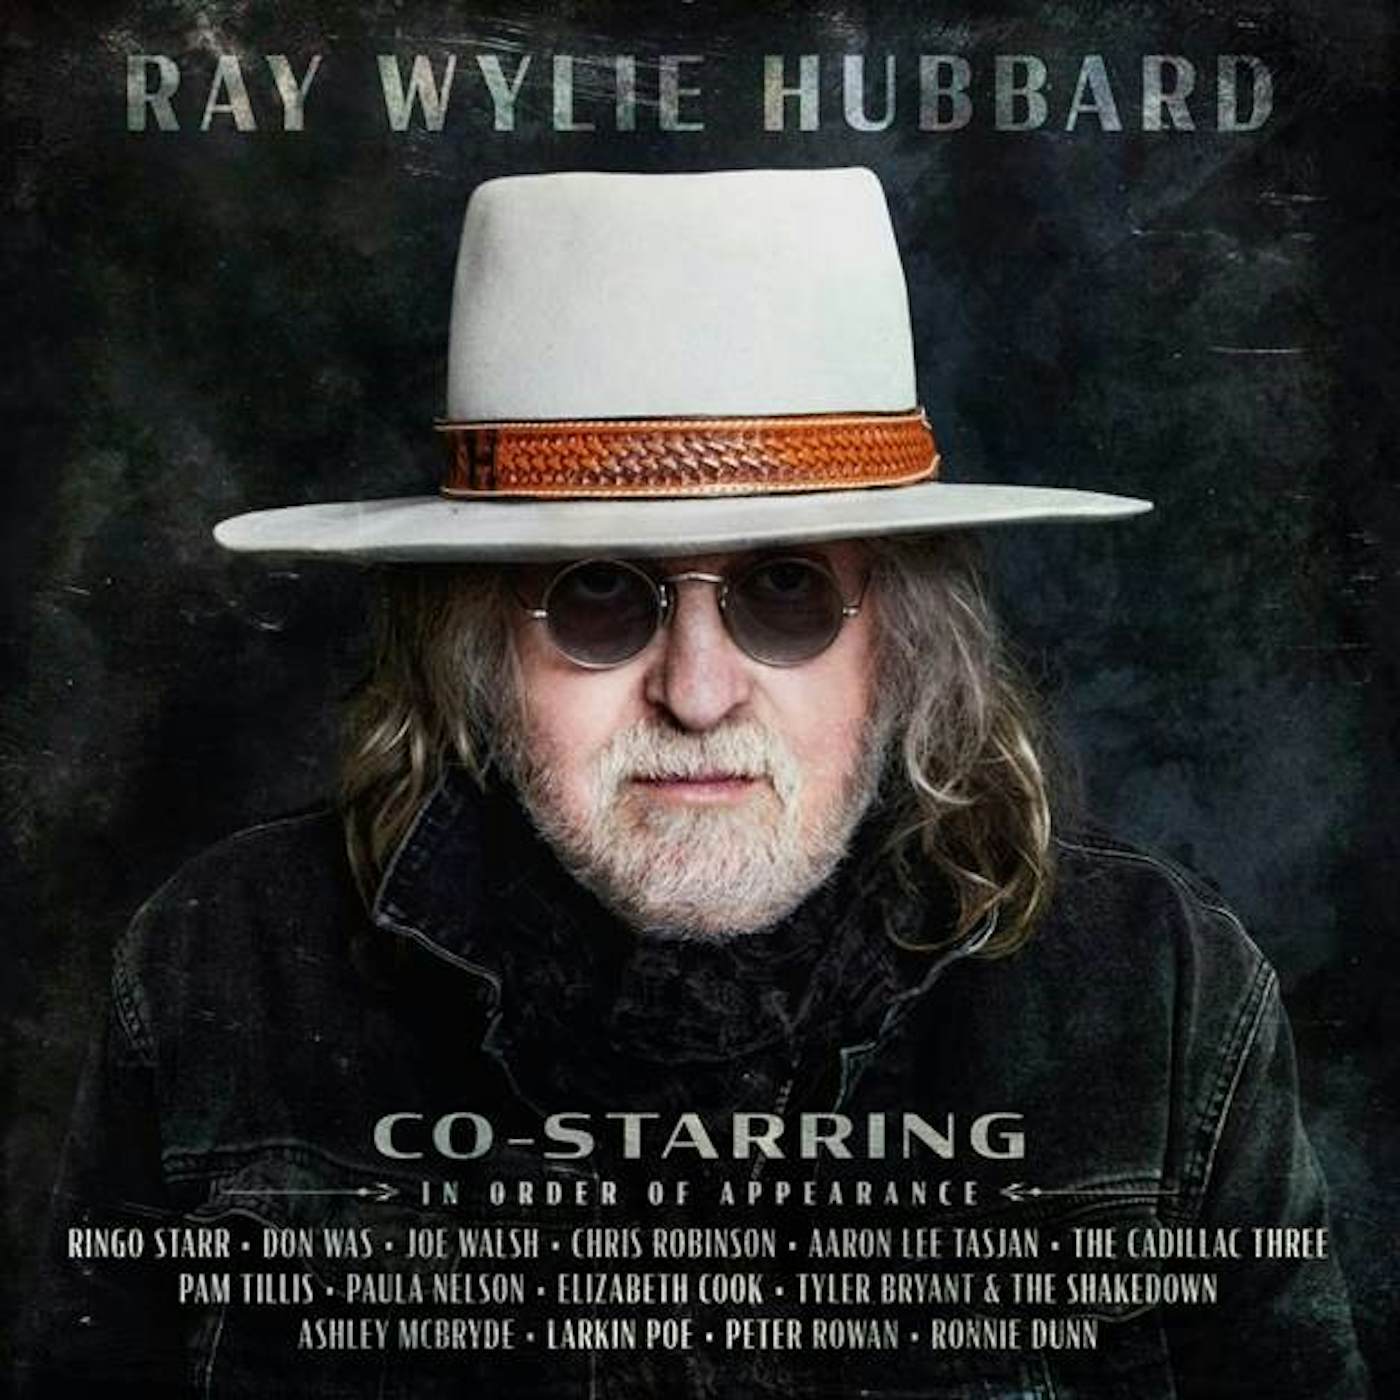 Ray Wylie Hubbard CO-STARRING CD